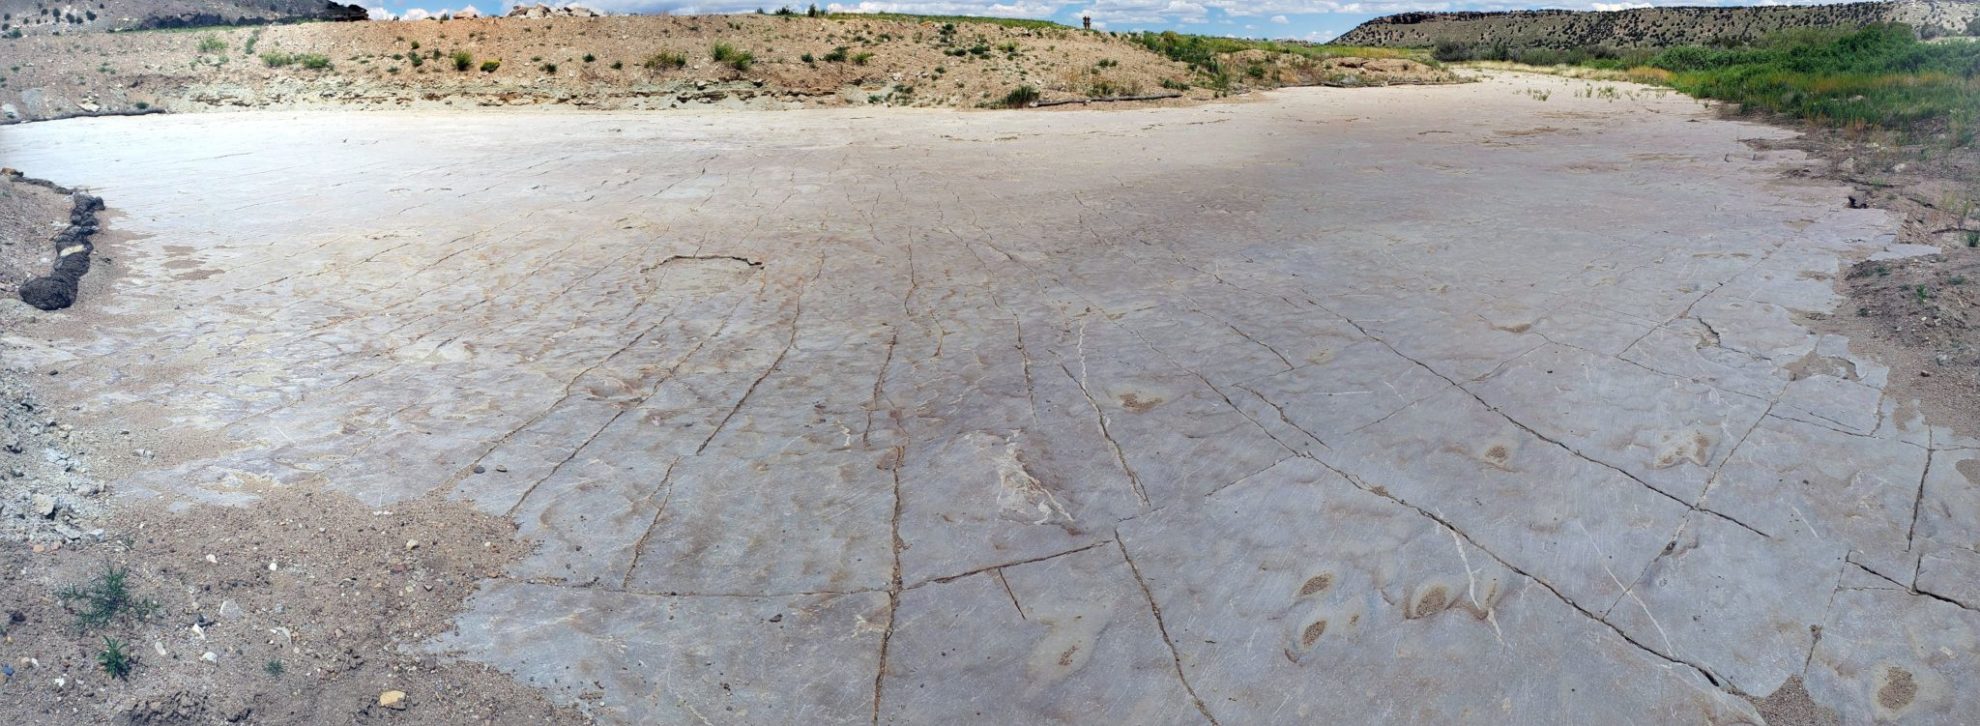 Large bedrock area along the near side of the river containing dinosaur tracks